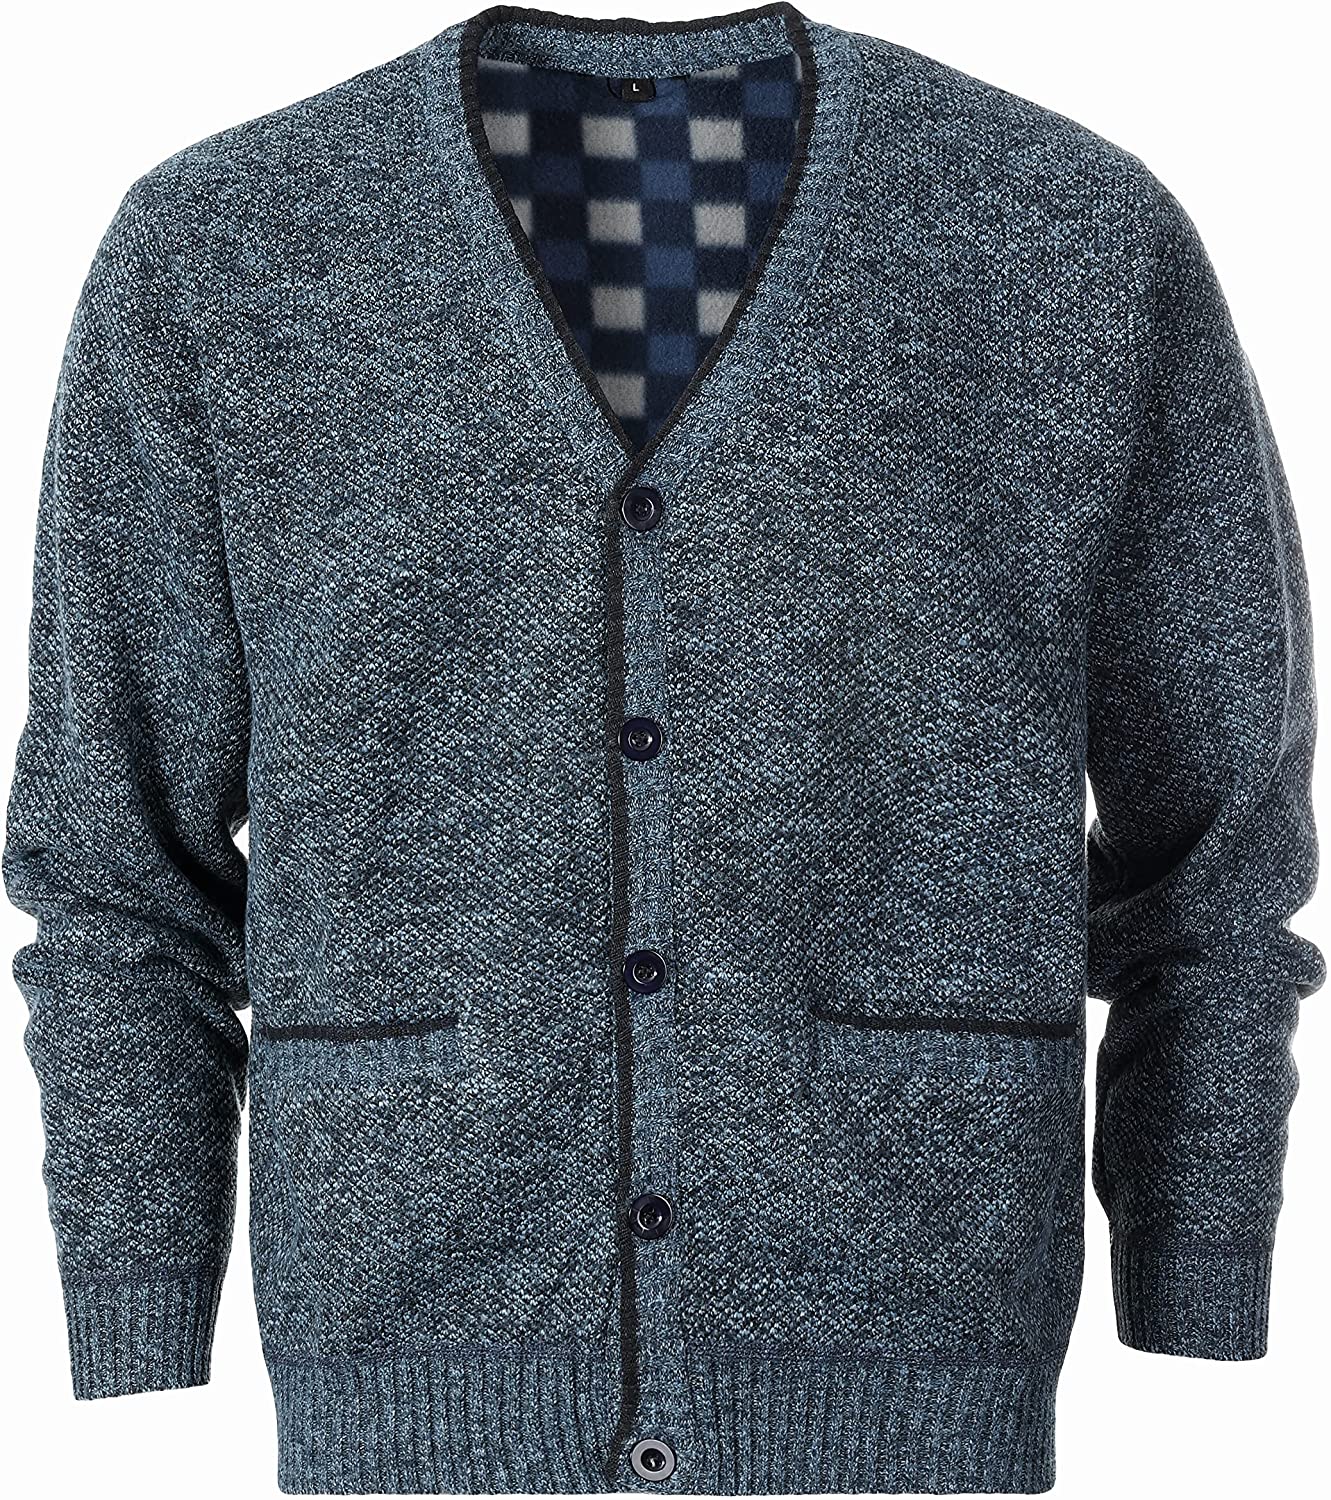 Gioberti Mens Knitted Regular Fit Full Zip Cardigan Sweater with Soft Brushed Flannel Lining